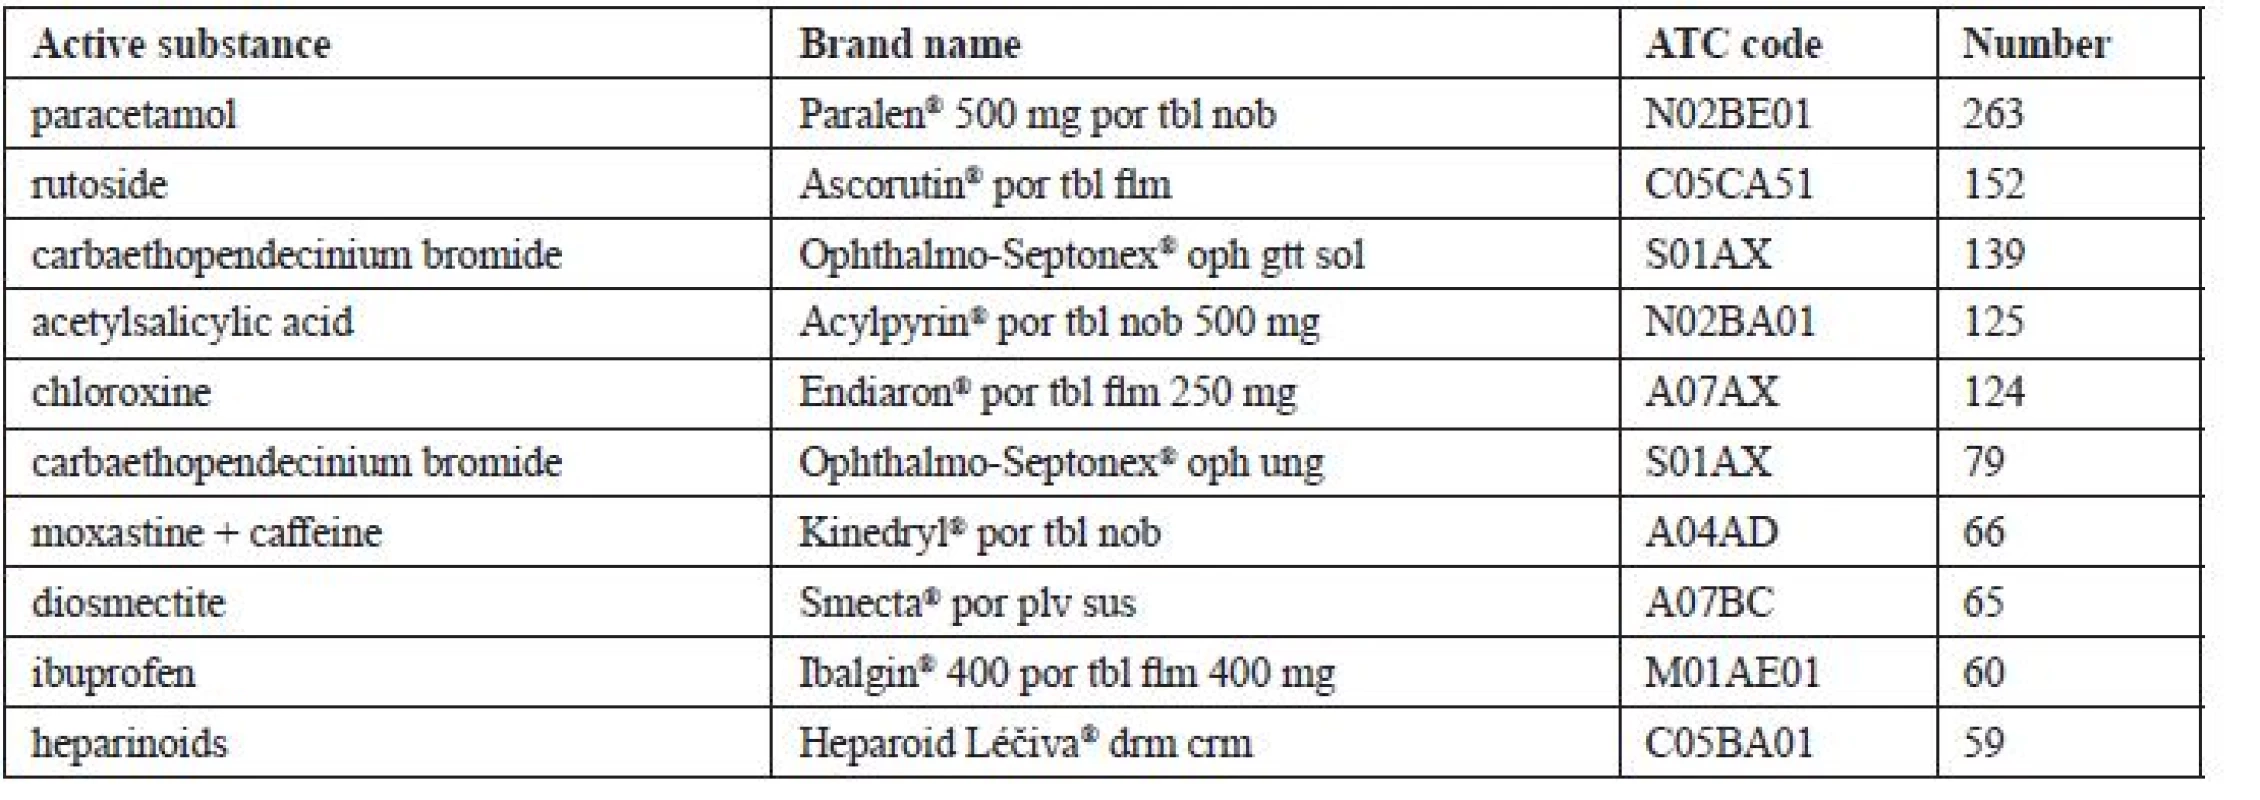 Most frequently returned OTC medicines (N = 5,281)